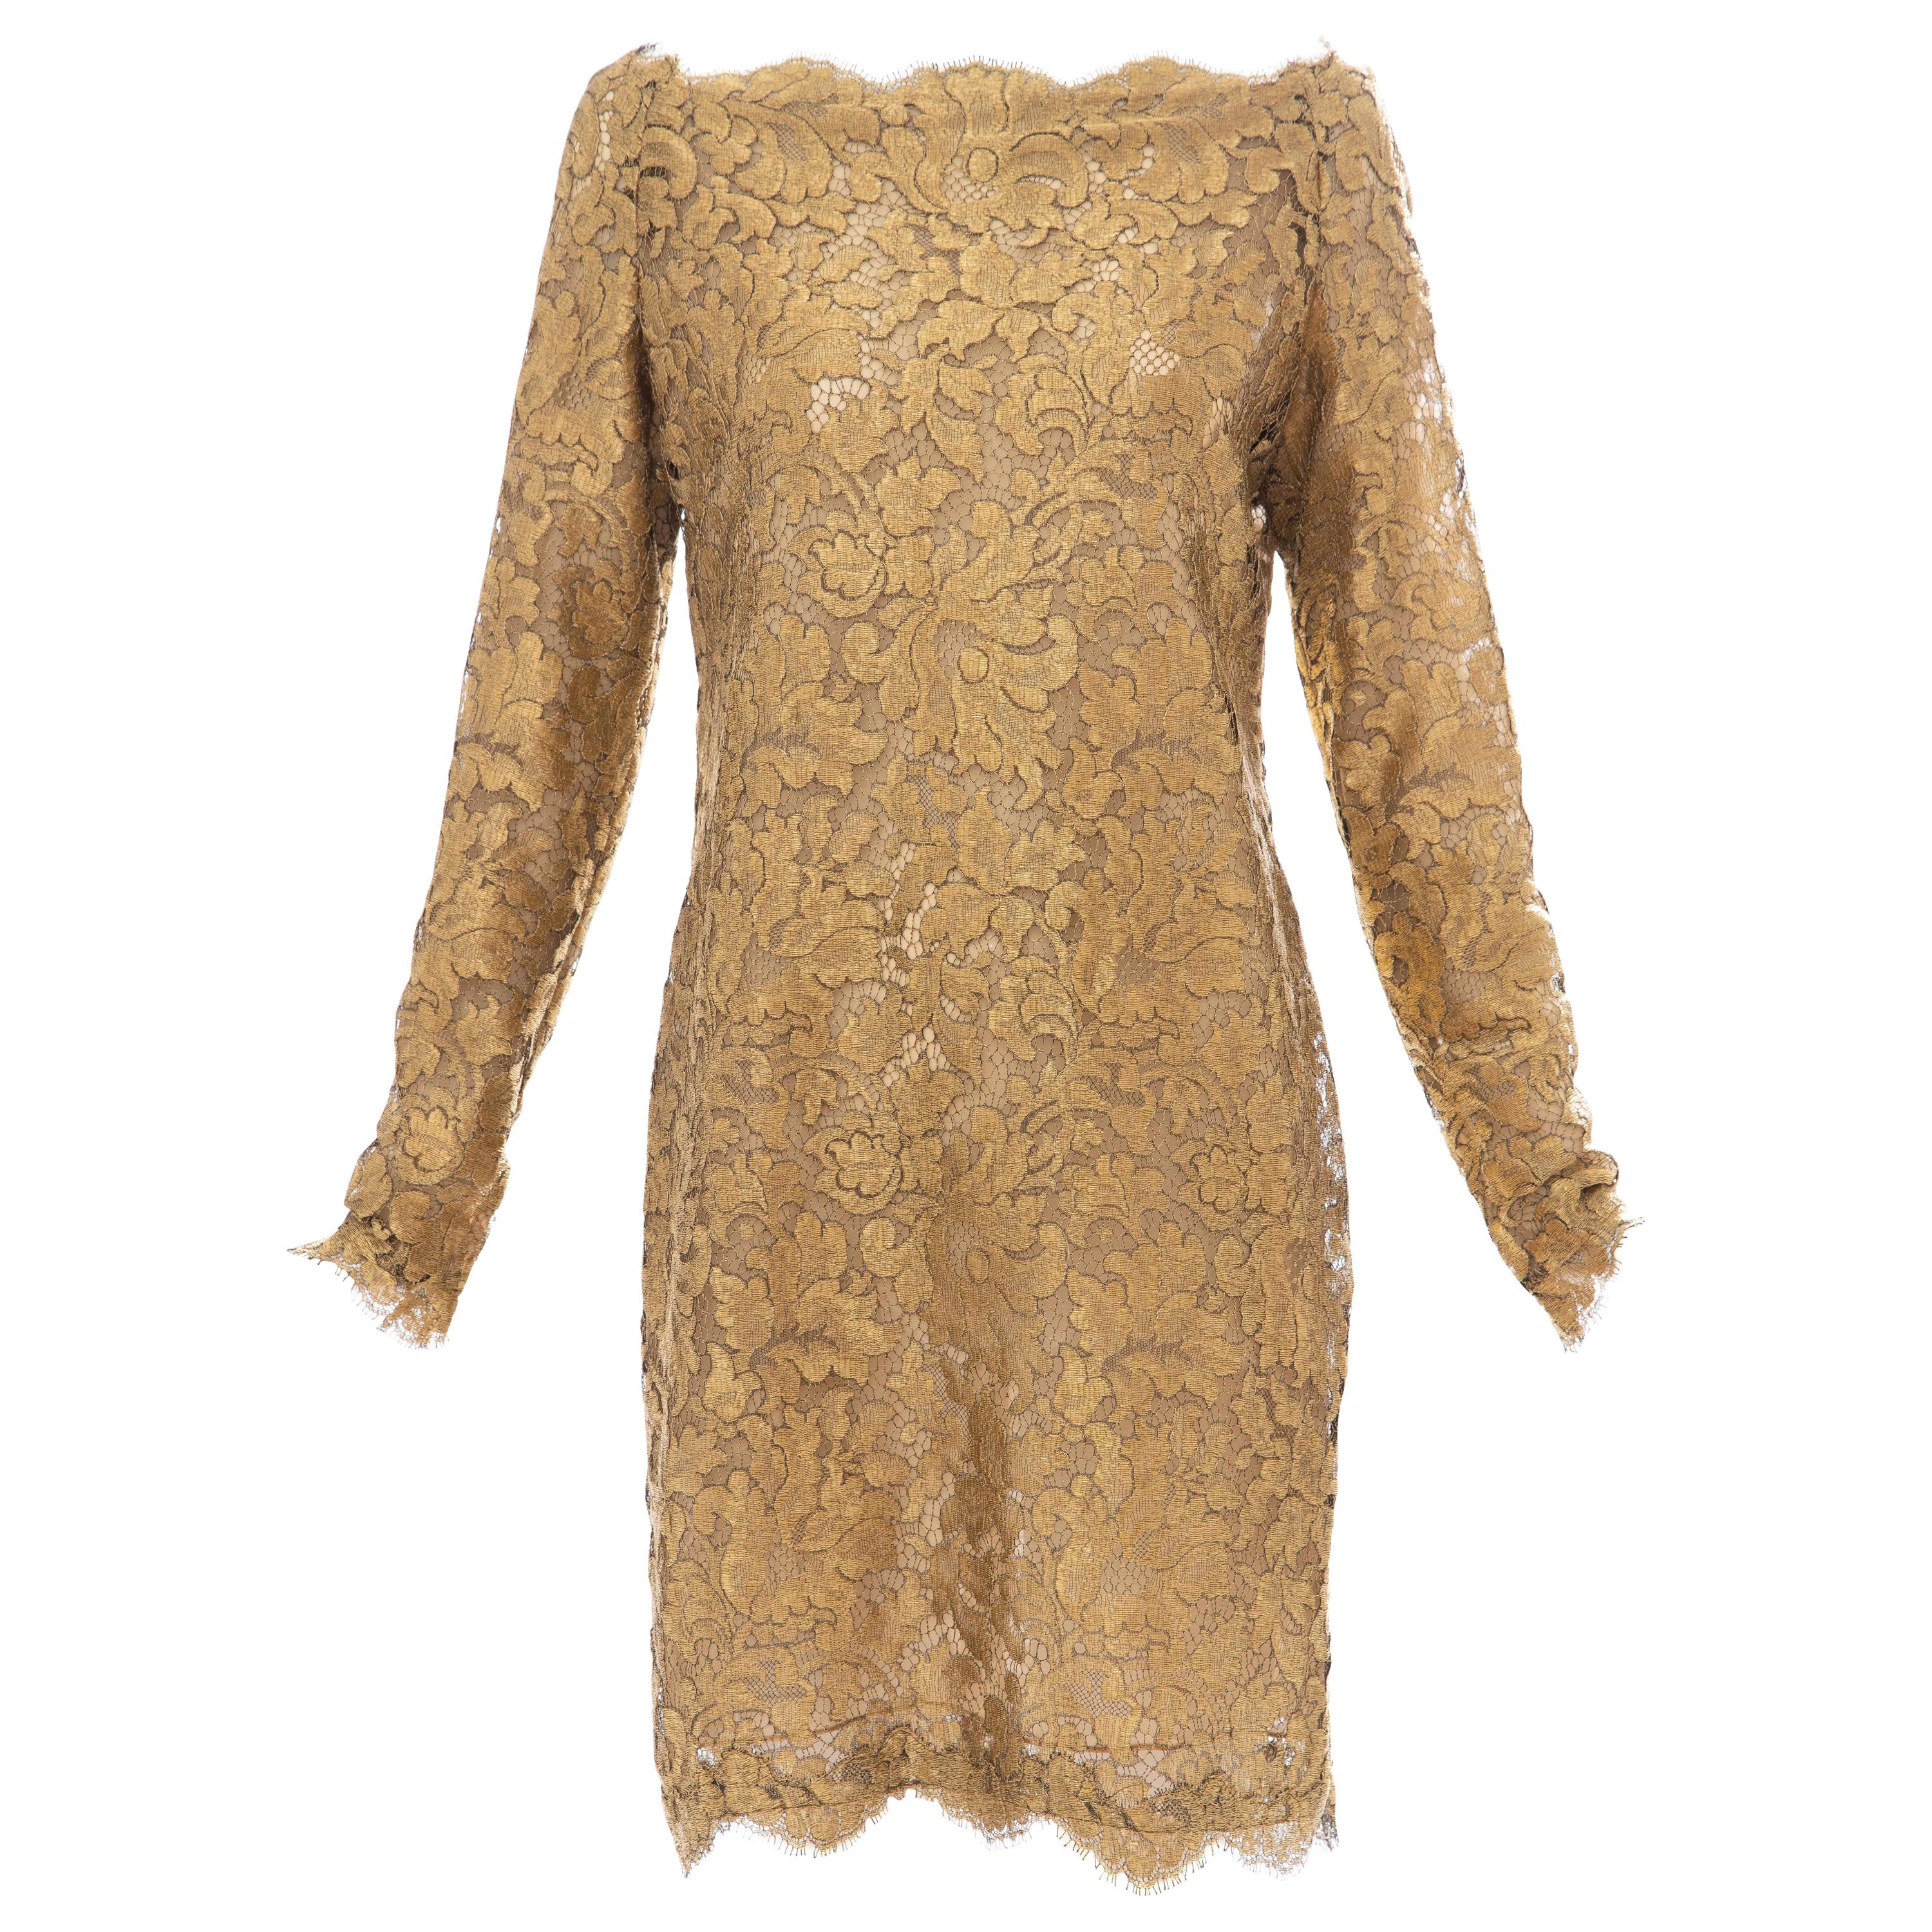 Calvin Klein Lace Dress - 2 For Sale on 1stDibs